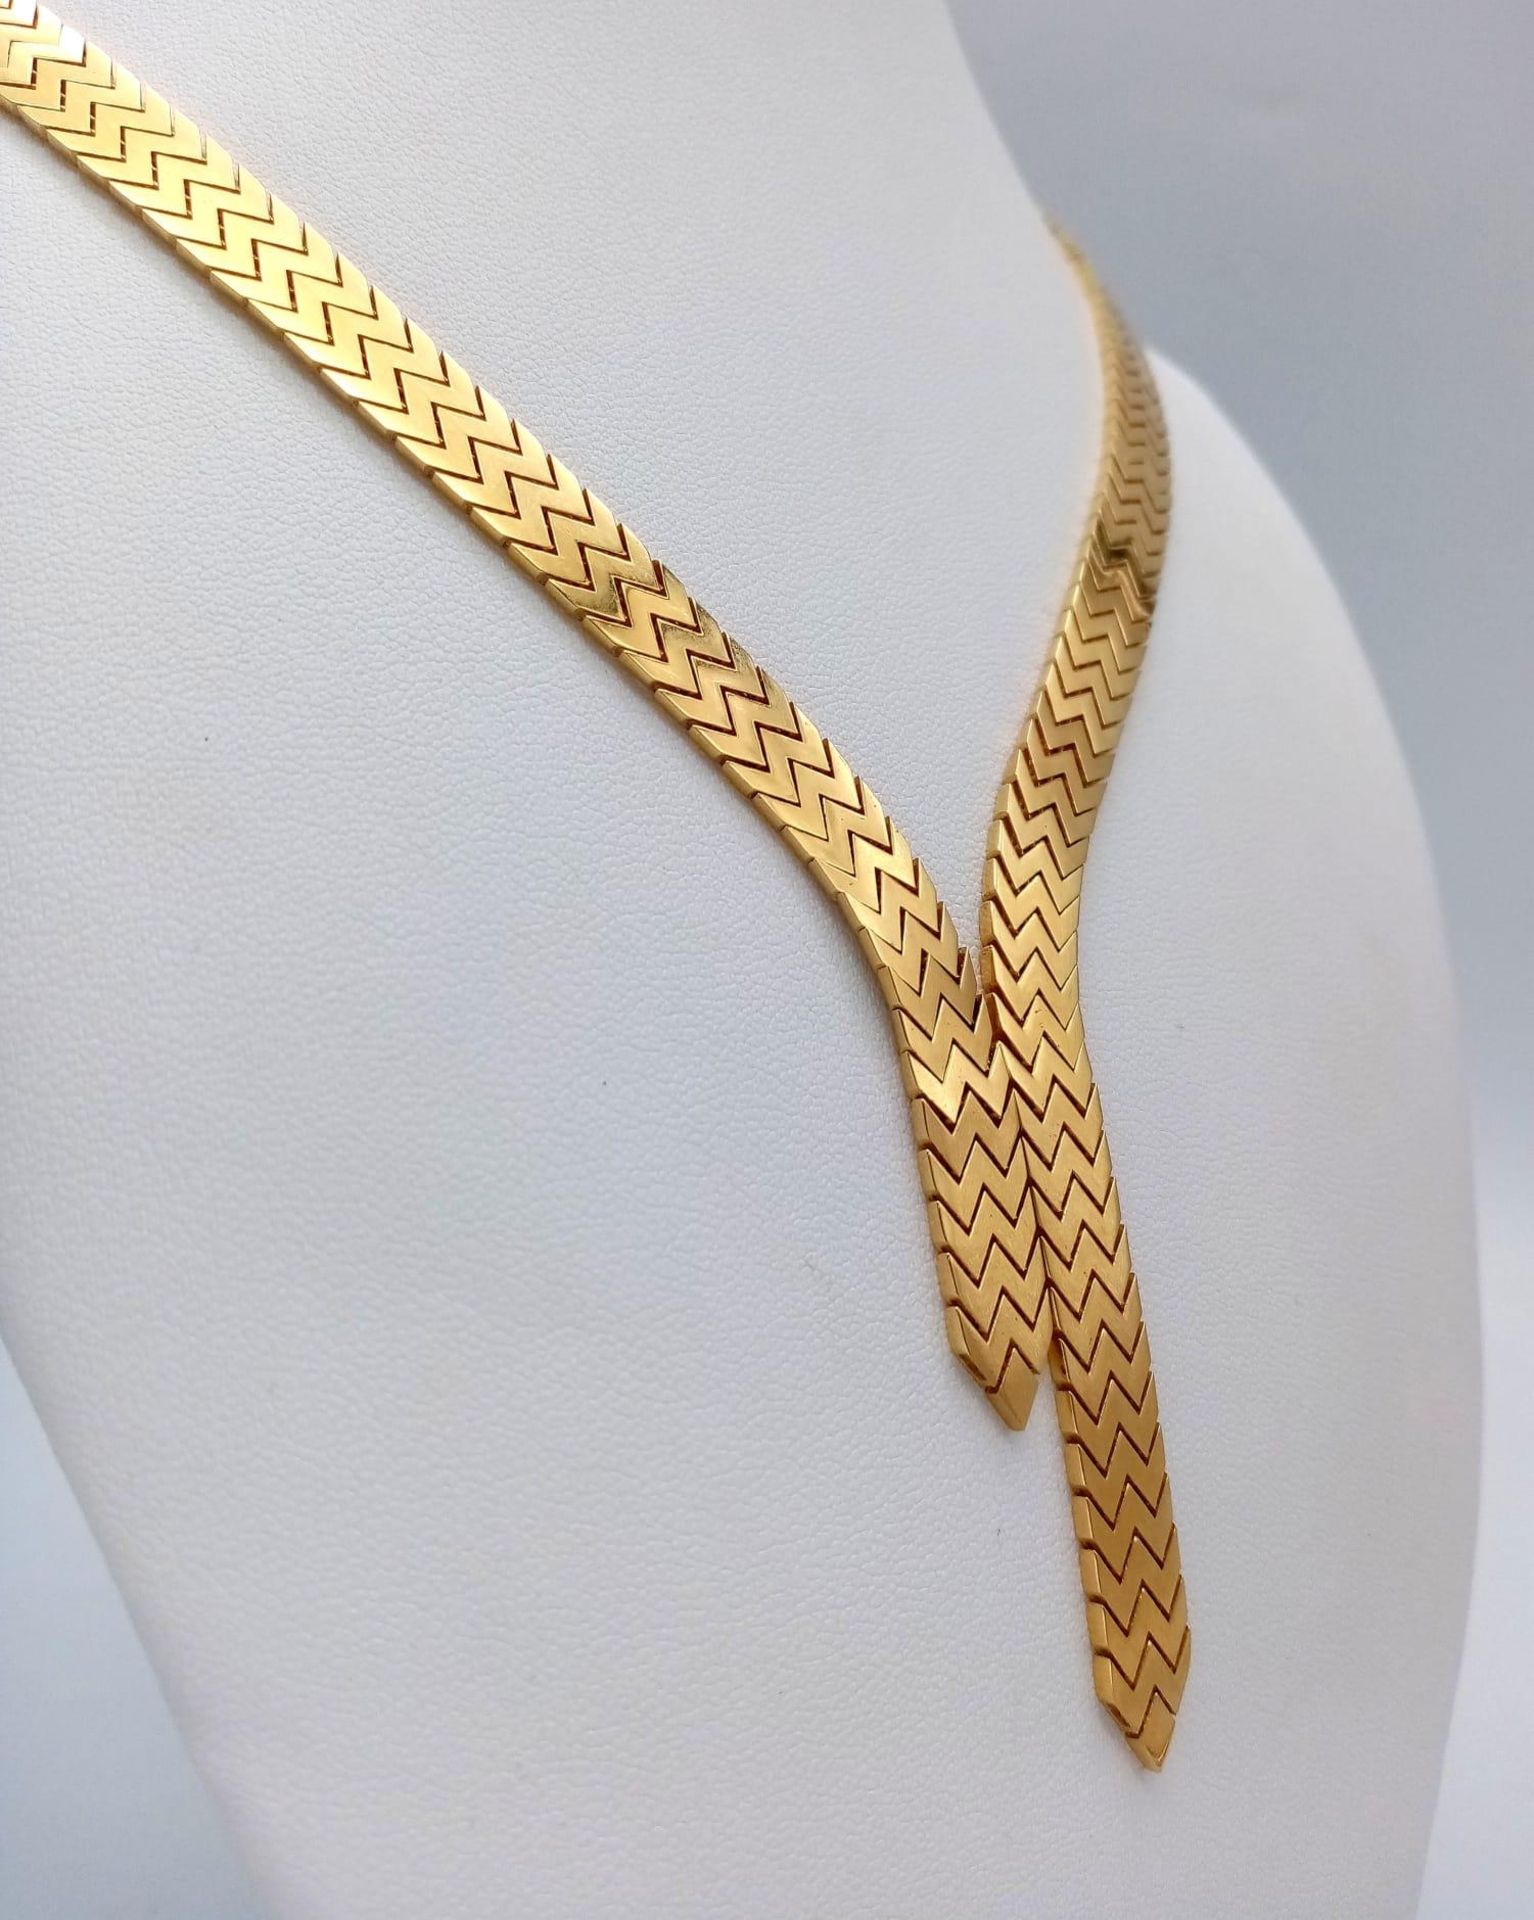 An Elegant 18K Gold Flat Scale Link Necklace with Twin Tassel Extenders. 48cm length. 35.25g weight. - Image 2 of 6